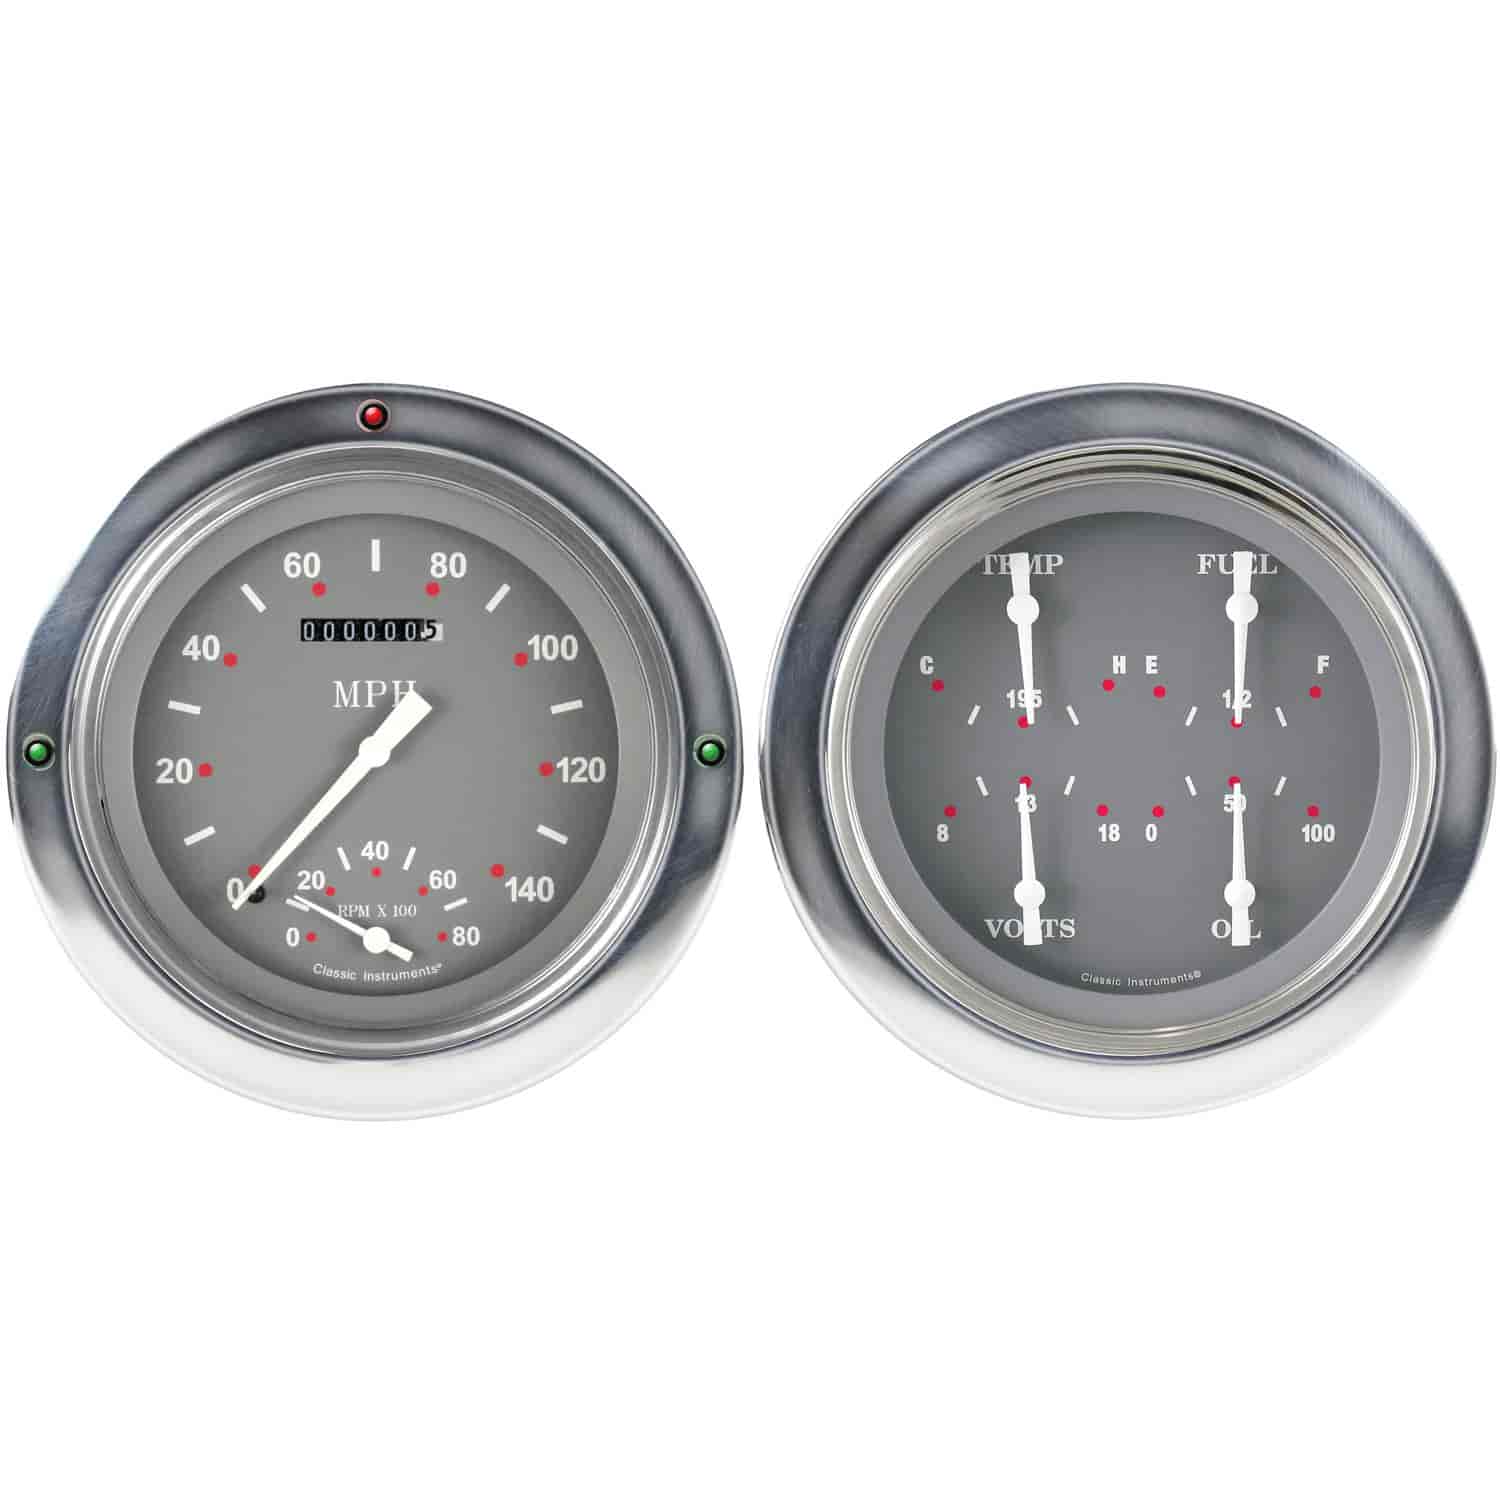 SG Series Gauge Package 1954-55 Chevy Truck (First Series) Includes: